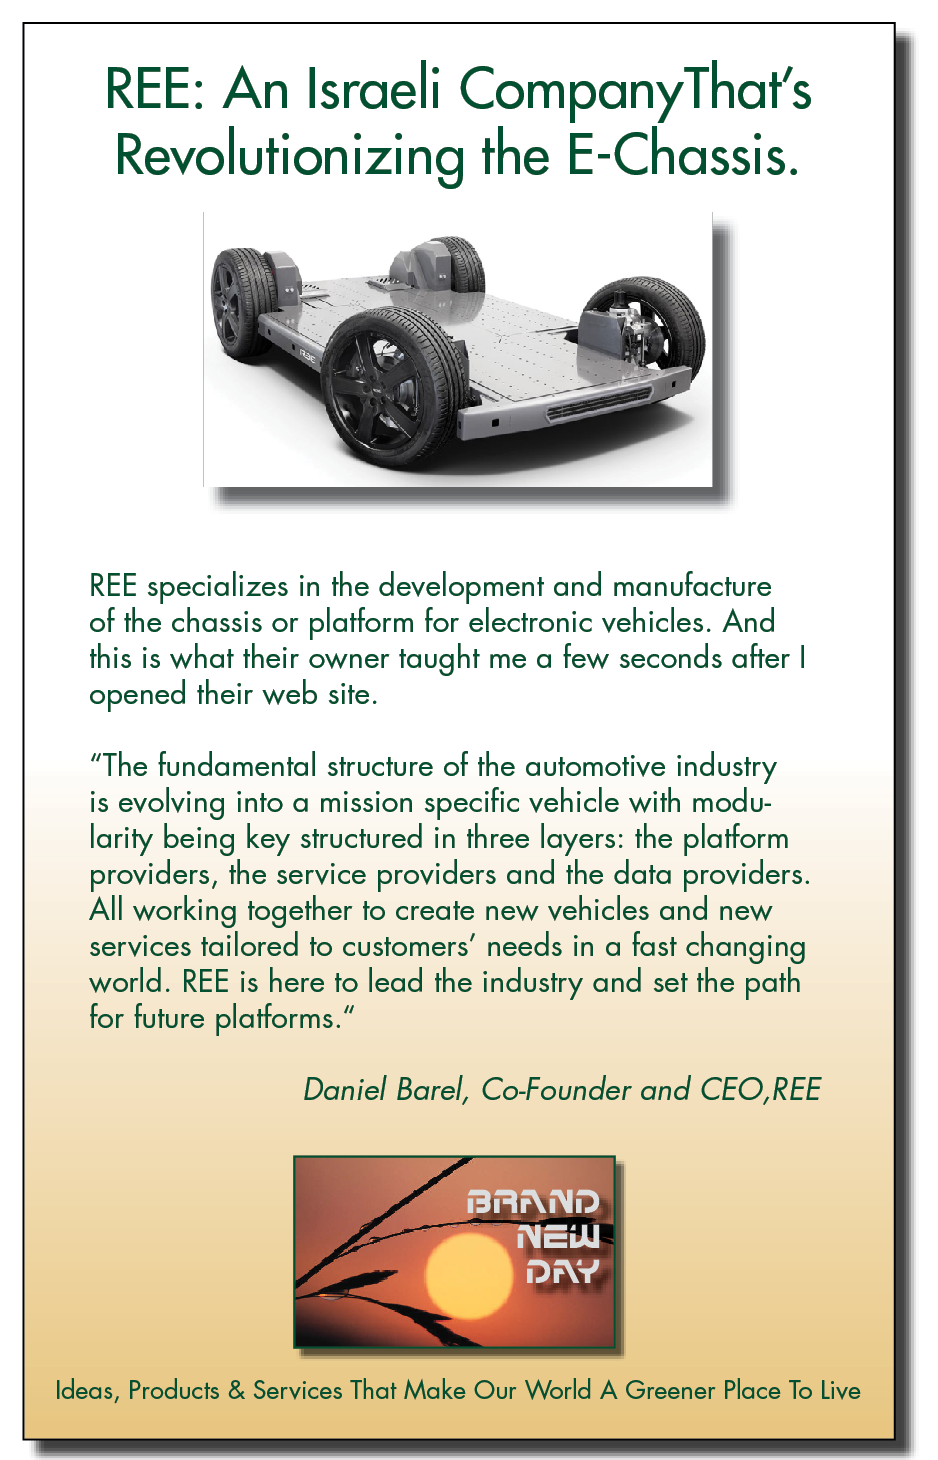 REE: An Israeli CompanyThat's
Revolutionizing the E-Chassis.

REE specializes in the development and manufacture
of the chassis or platform for electronic vehicles. And
this is what their owner taught me a few seconds after |
opened their web site.

“The fundamental structure of the automotive industry

is evolving into a mission specific vehicle with modu-
larity being key structured in three layers: the platform
providers, the service providers and the data providers.
All working together to create new vehicles and new
services tailored to customers’ needs in a fast changing
world. REE is here to lead the industry and set the path
for future platforms.”

Daniel Barel, Co-Founder and CEO,REE

ERX [Pp]
OY]
=

Ideas, Products & Services That Make Our World A Greener Place To Live